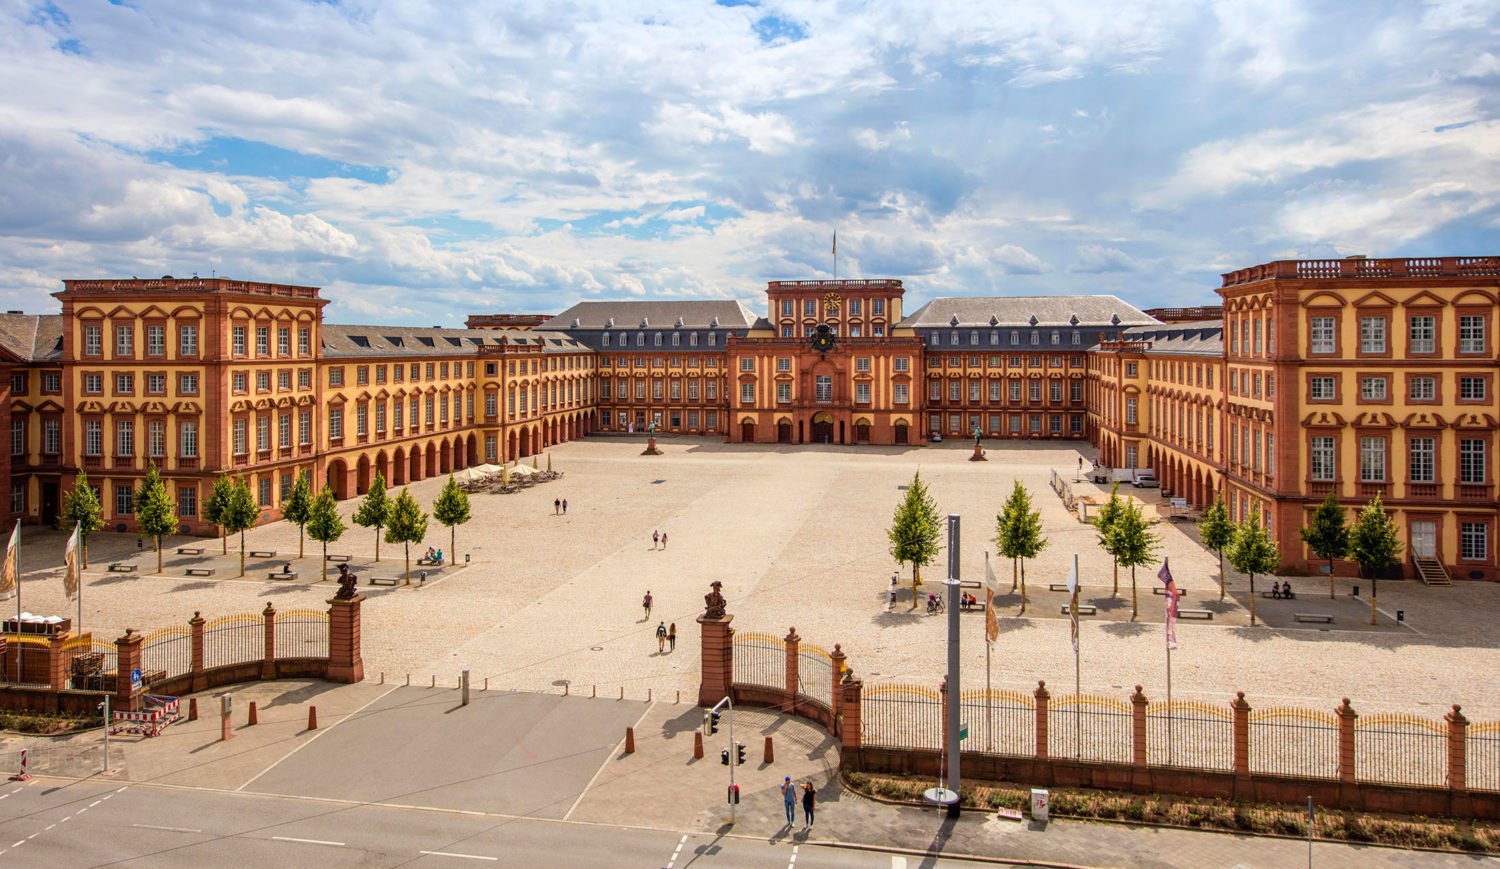 The baroque palace of Mannheim with its wide courtyard of honor and long display facade is one of the largest palaces in Europe